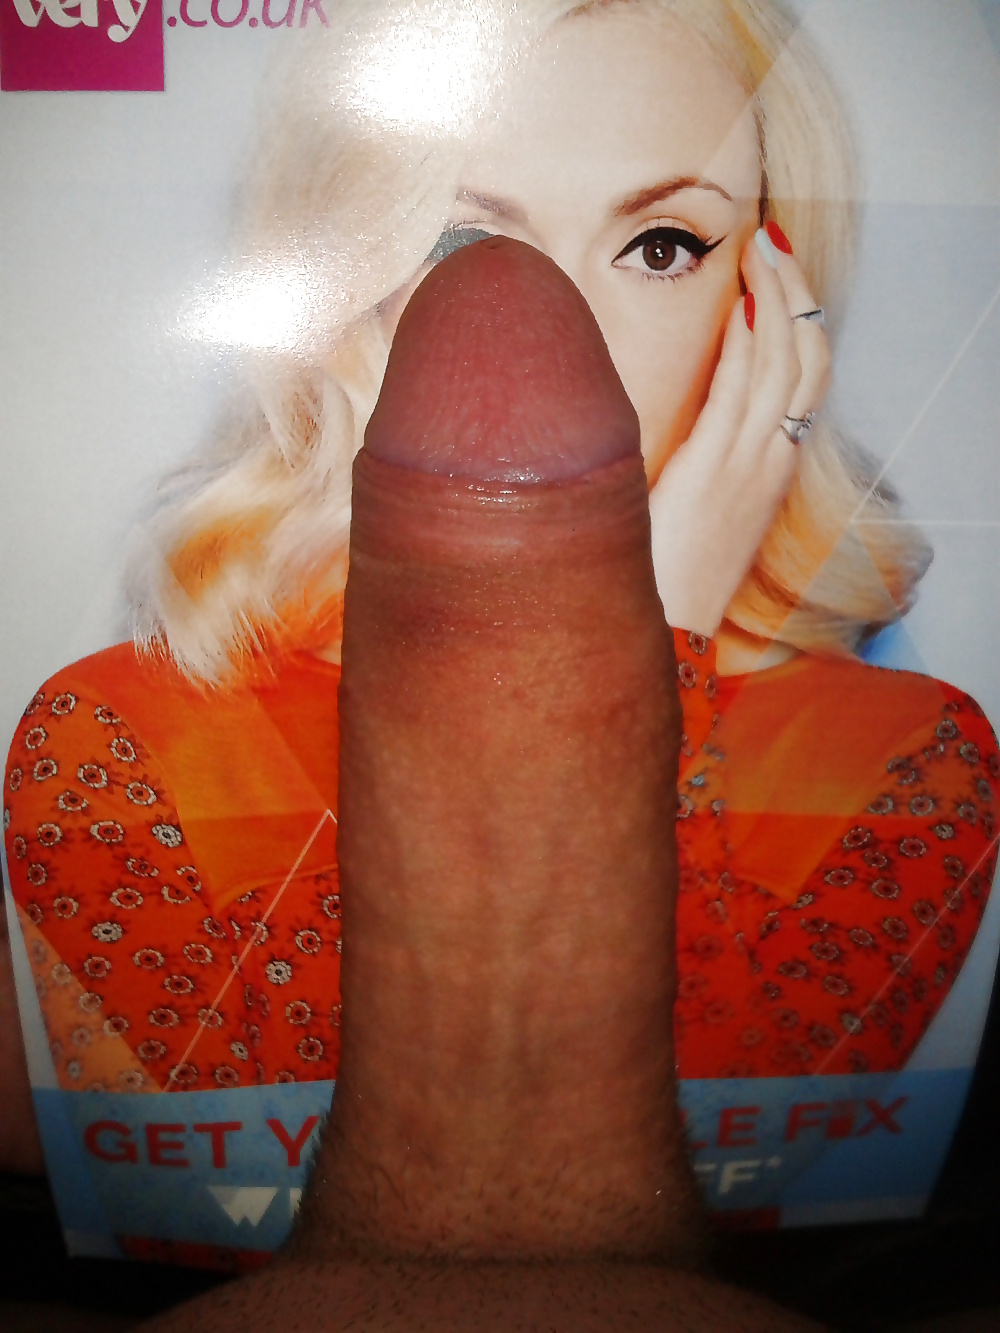 Fearne cotton cocked.
 #27434003